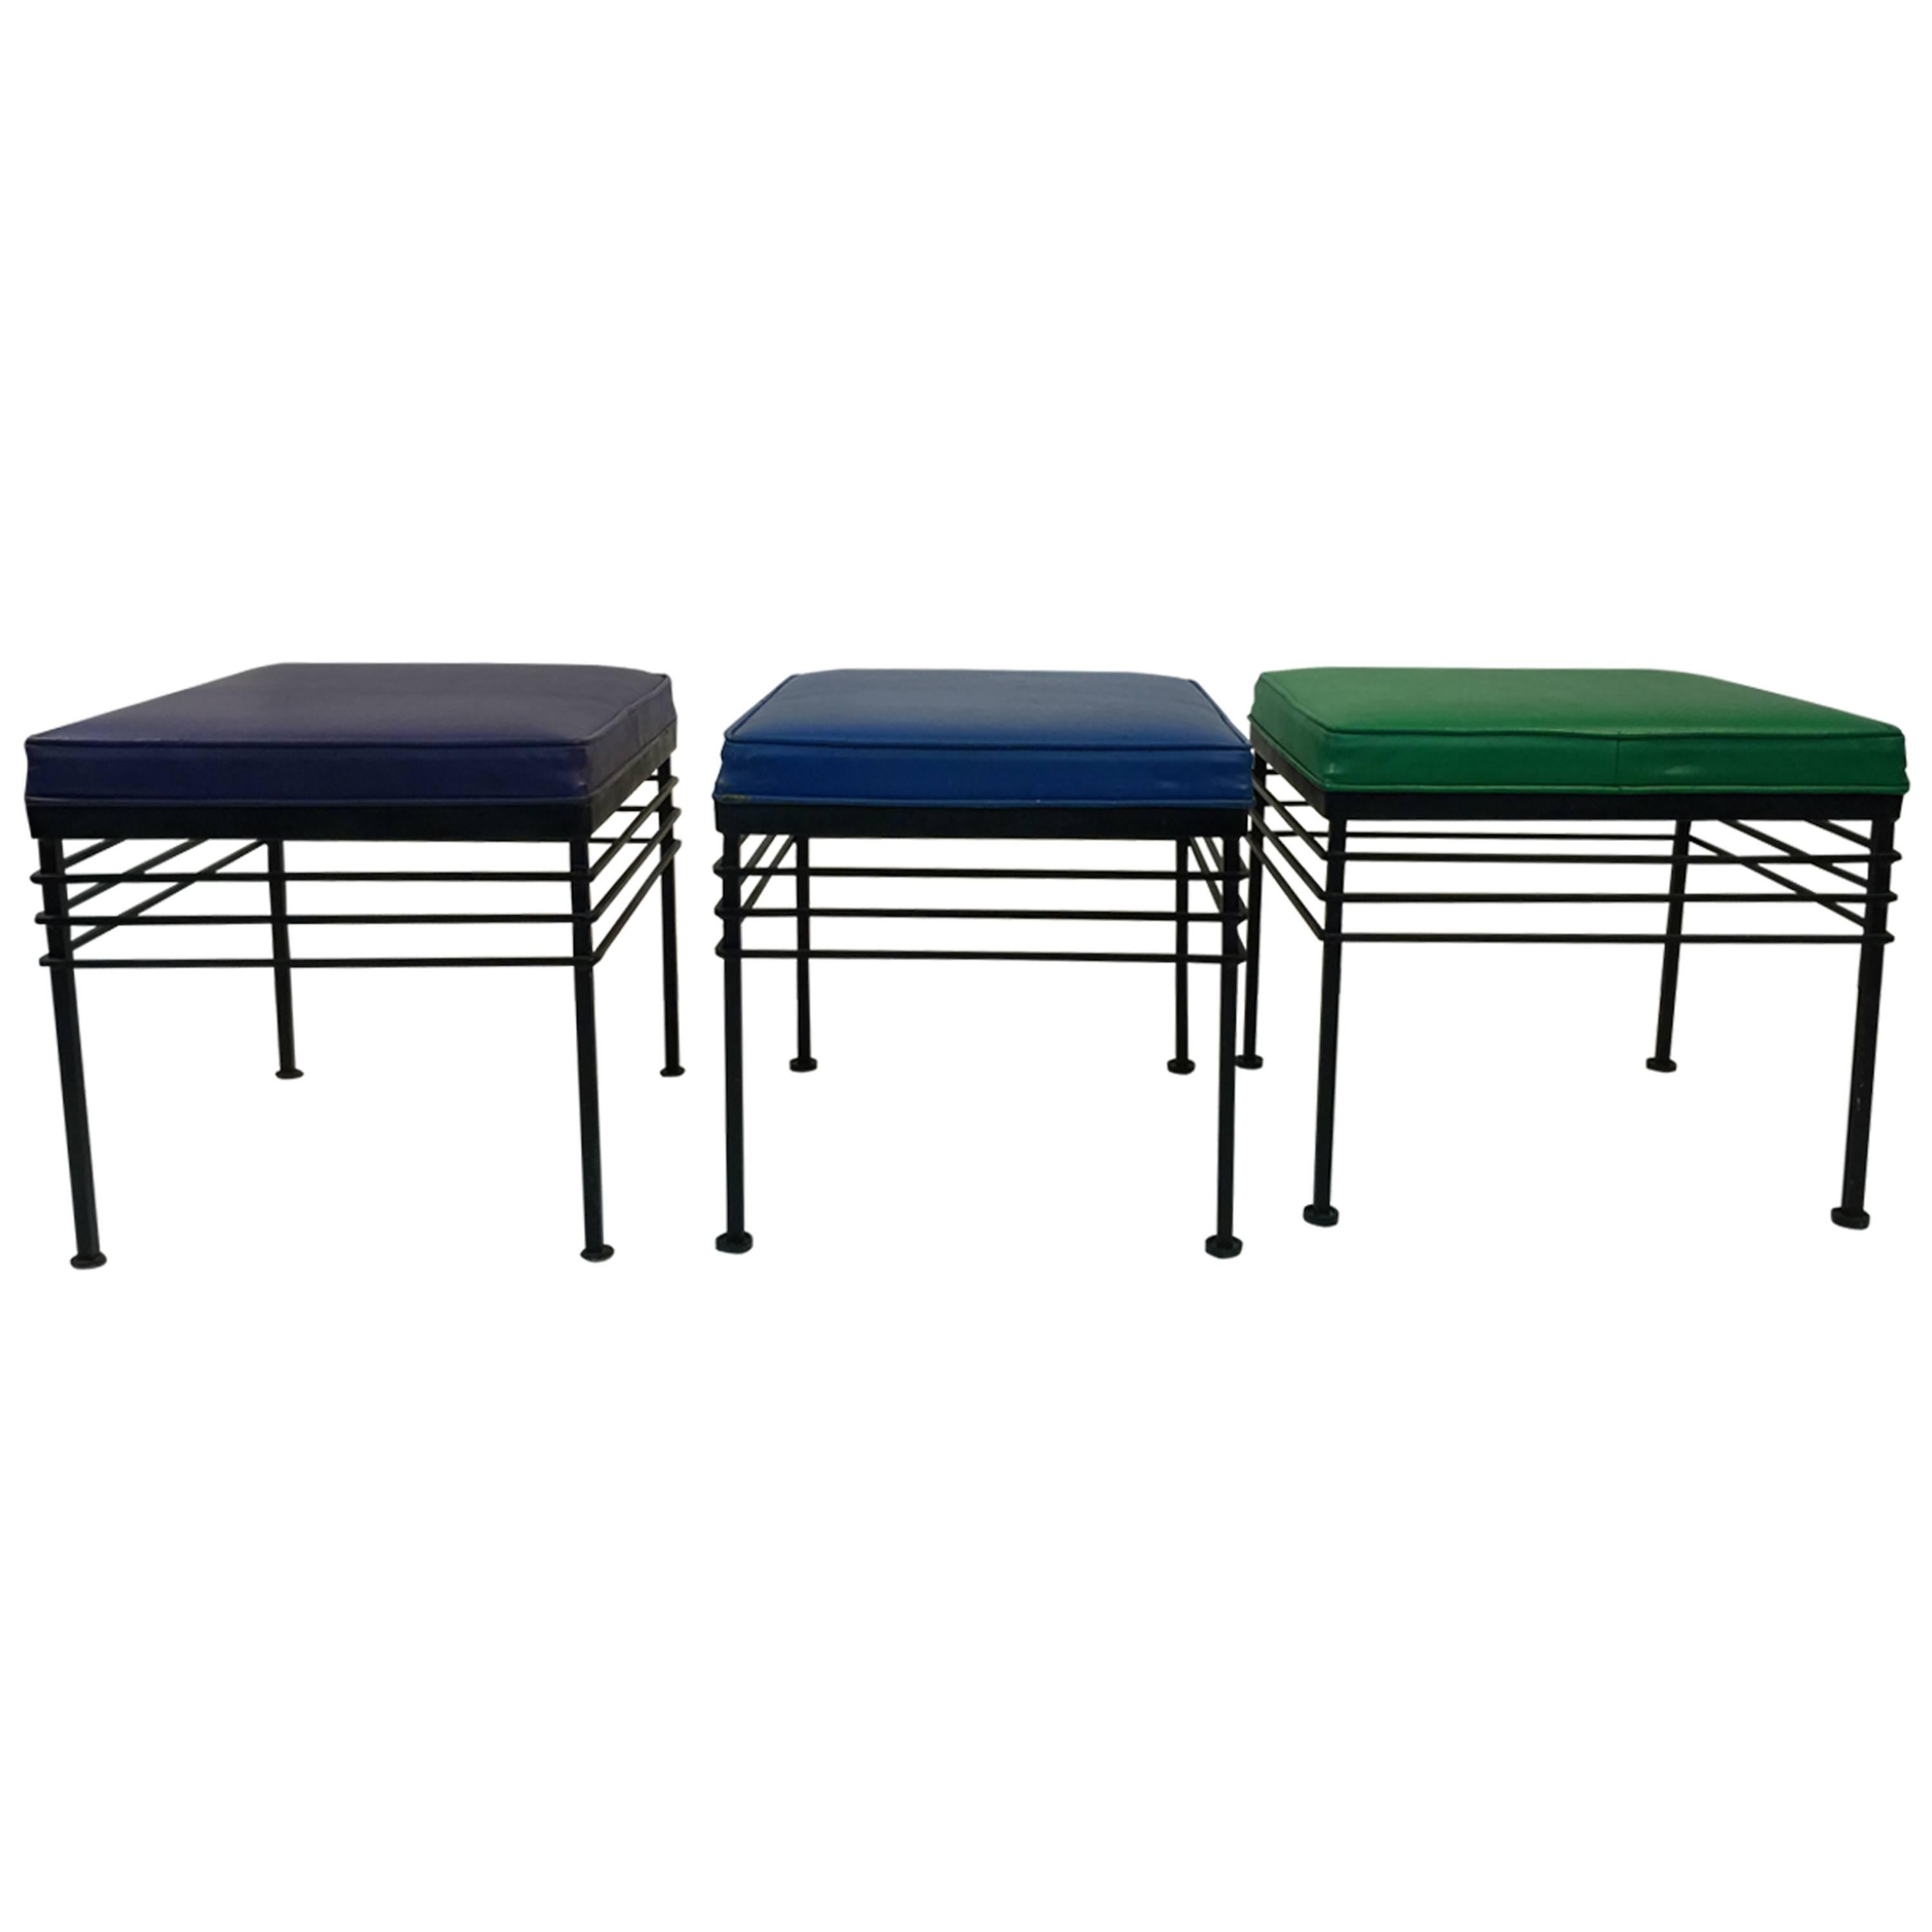 Super Set of Three Paul McCobb Style Stools or Benches, circa 1970 For Sale